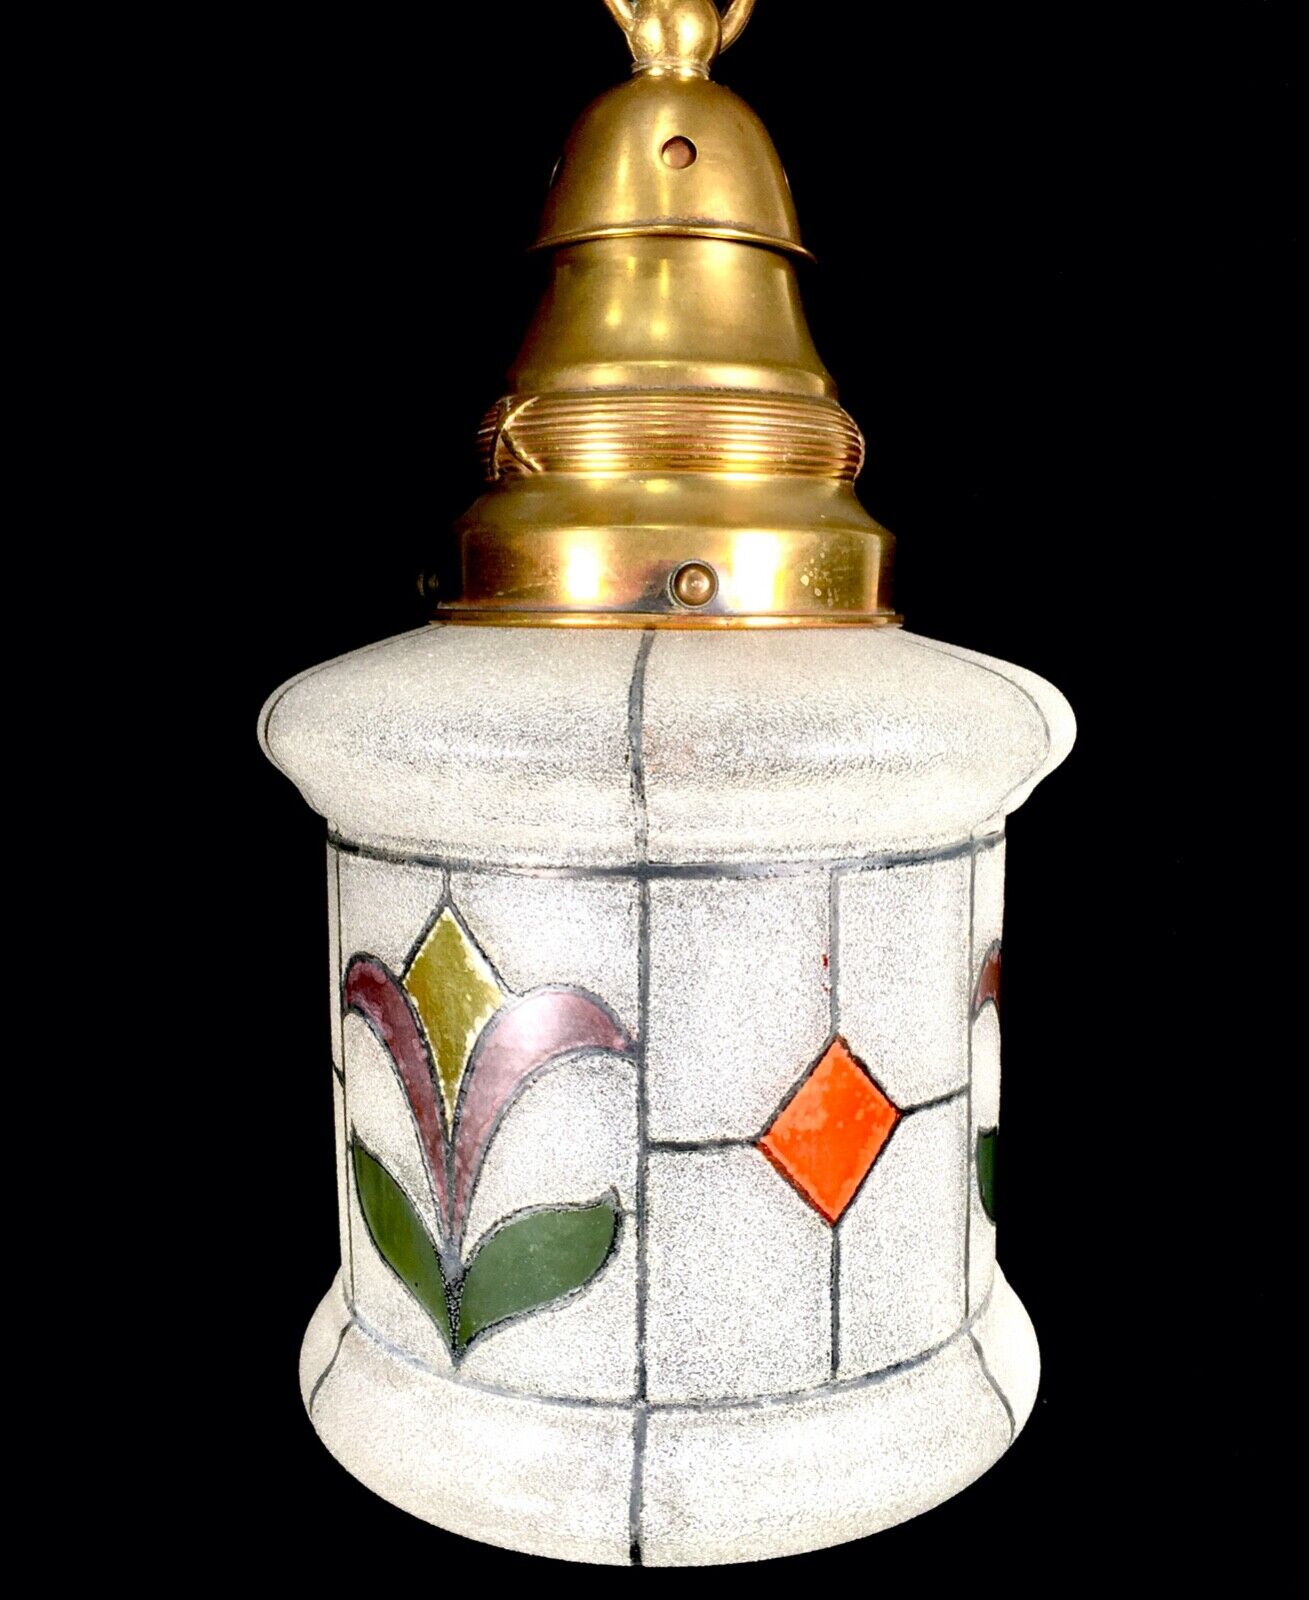 Antique Art Deco Glass Hall Lantern Ceiling Light / Textured Stained Glass c1920